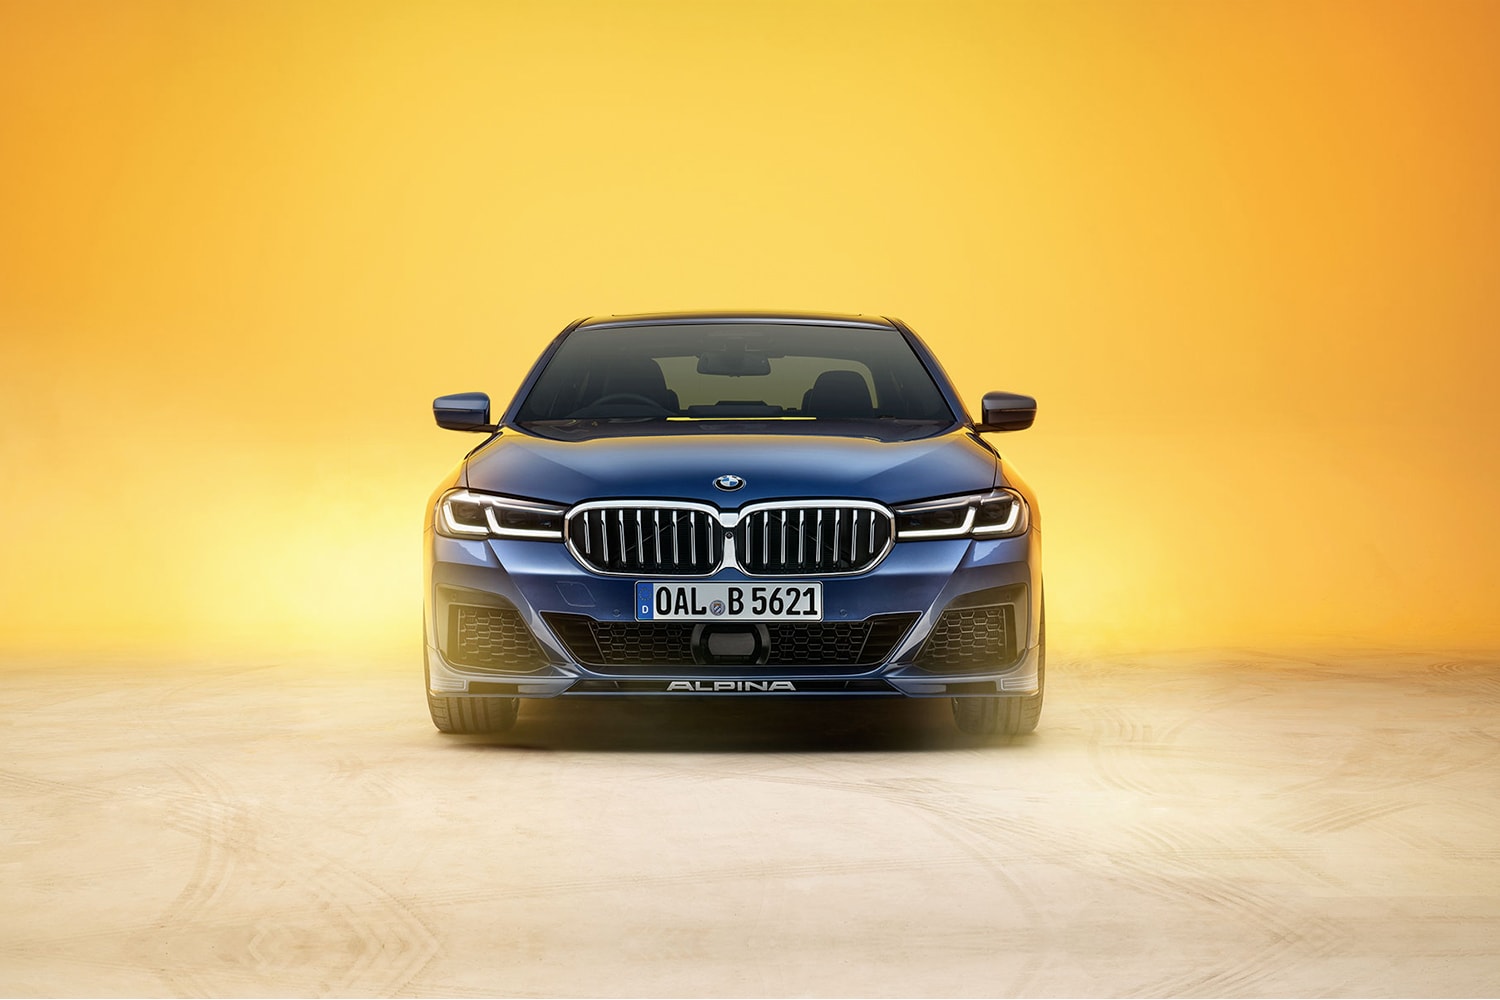 2020 Alpina B5 and D5 S Unveiled with Increased Power bmw m5 horsepower styling twin-turbo 4.4-liter BMW V8 3.0-liter inline-six diesel engine 